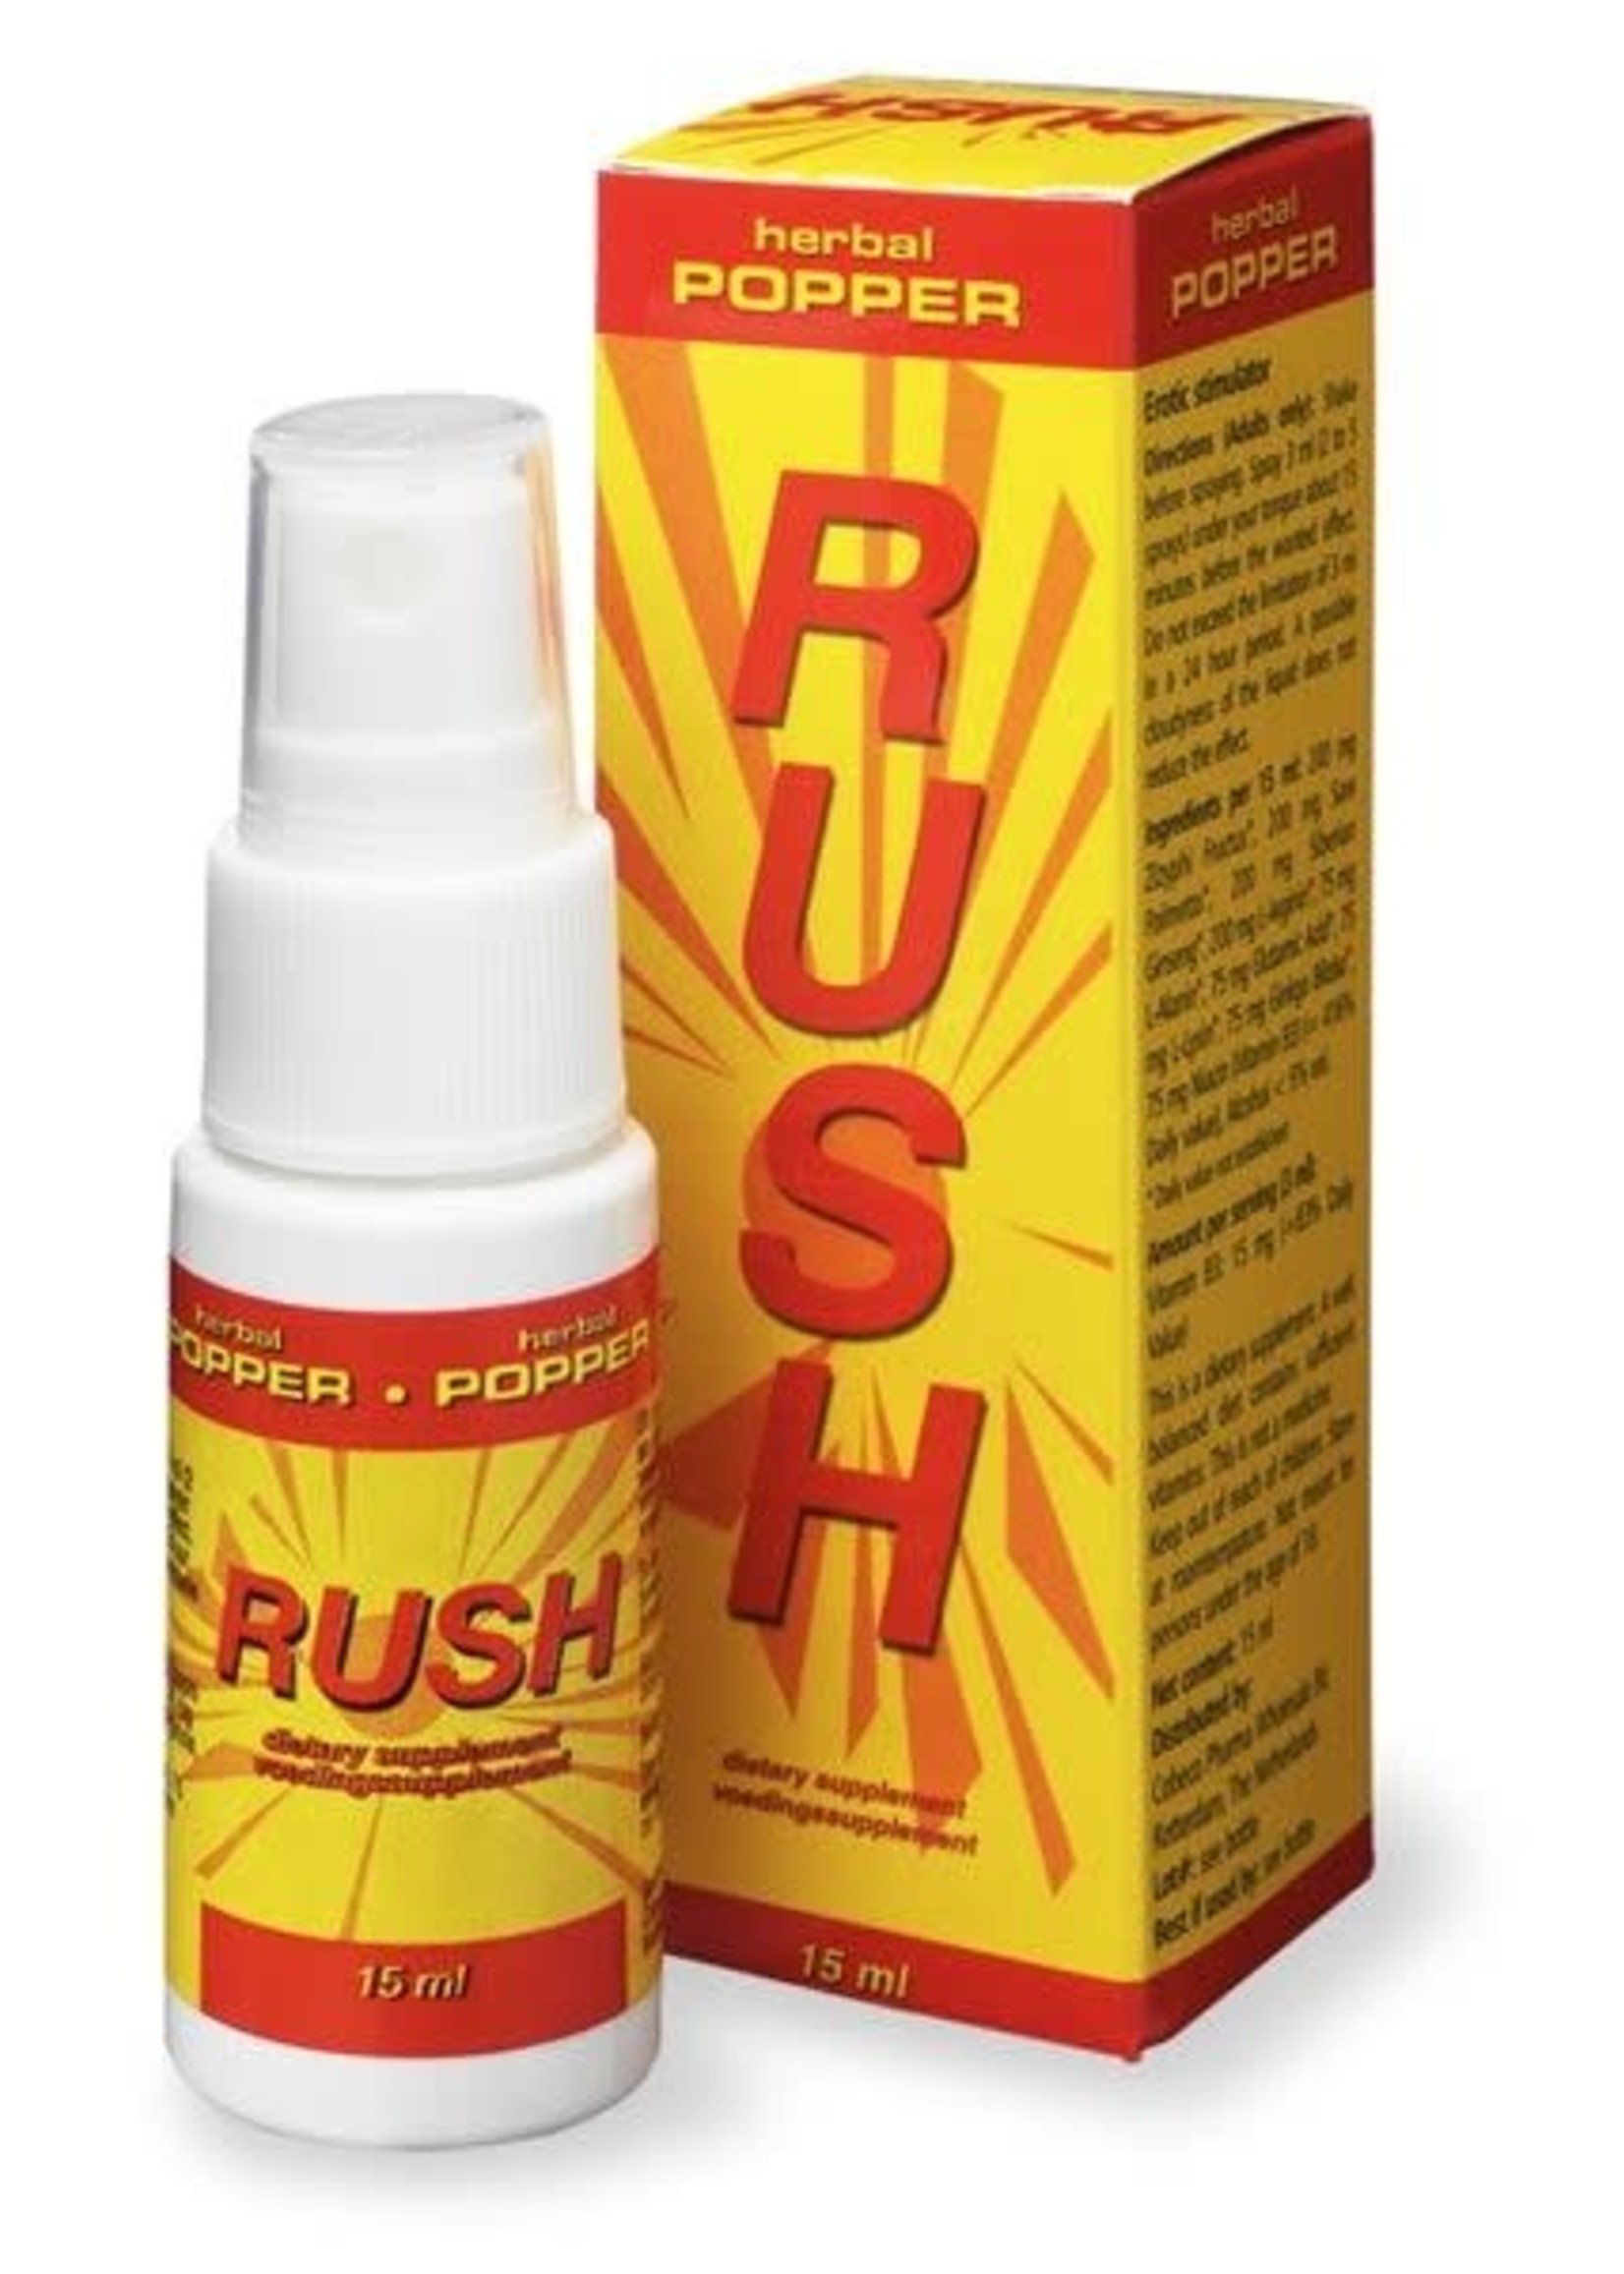 O-Products rush herbal poppers - 15 ml